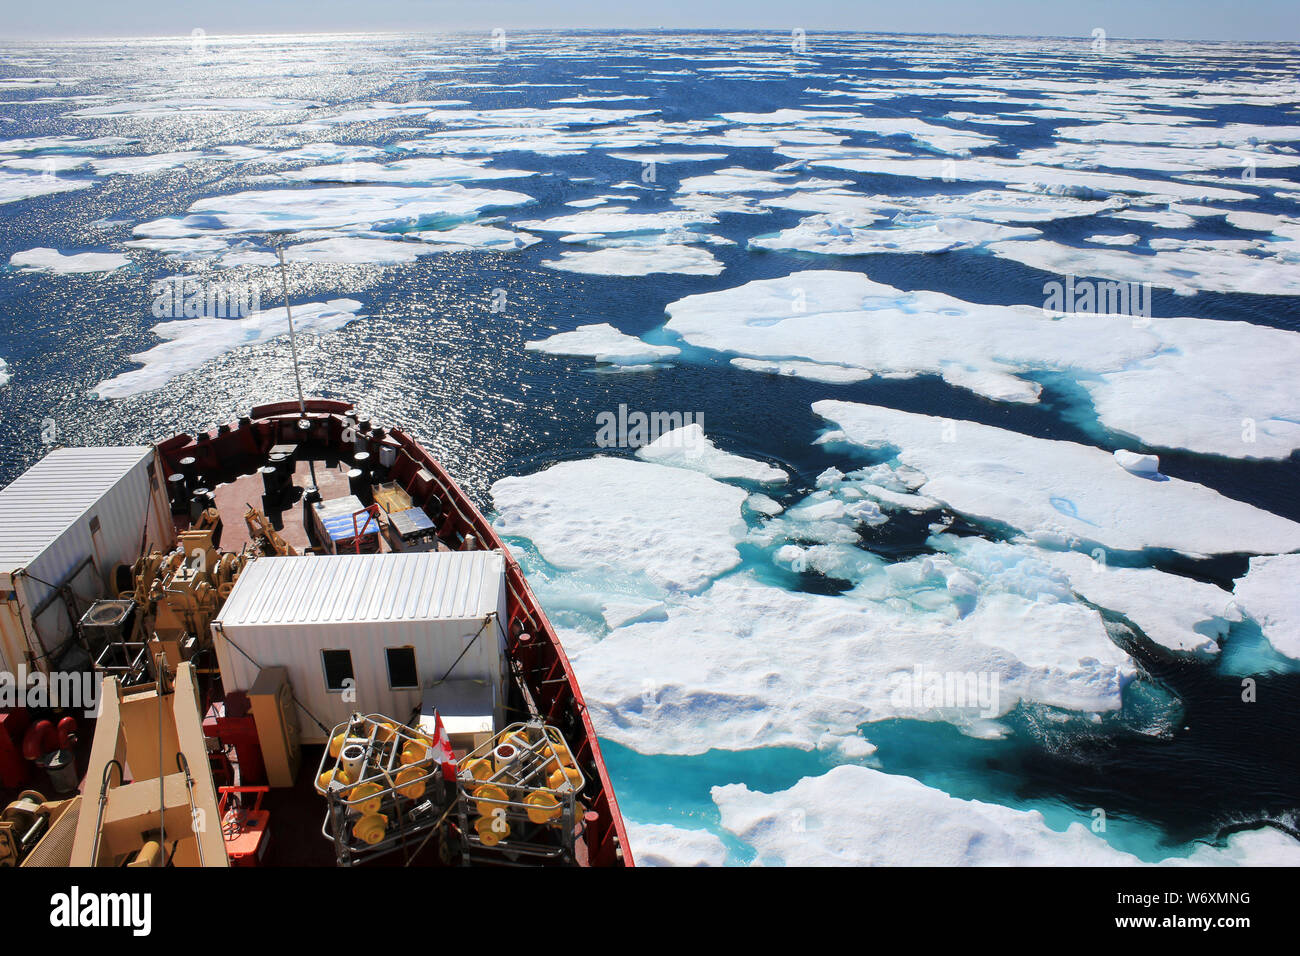 CCGS Amundsen Breaking Through The Ice In The Davis Strait, Canada, Eastern Arctic during an Expedition by ArcticNet and ATLAS EU Scientists Stock Photo